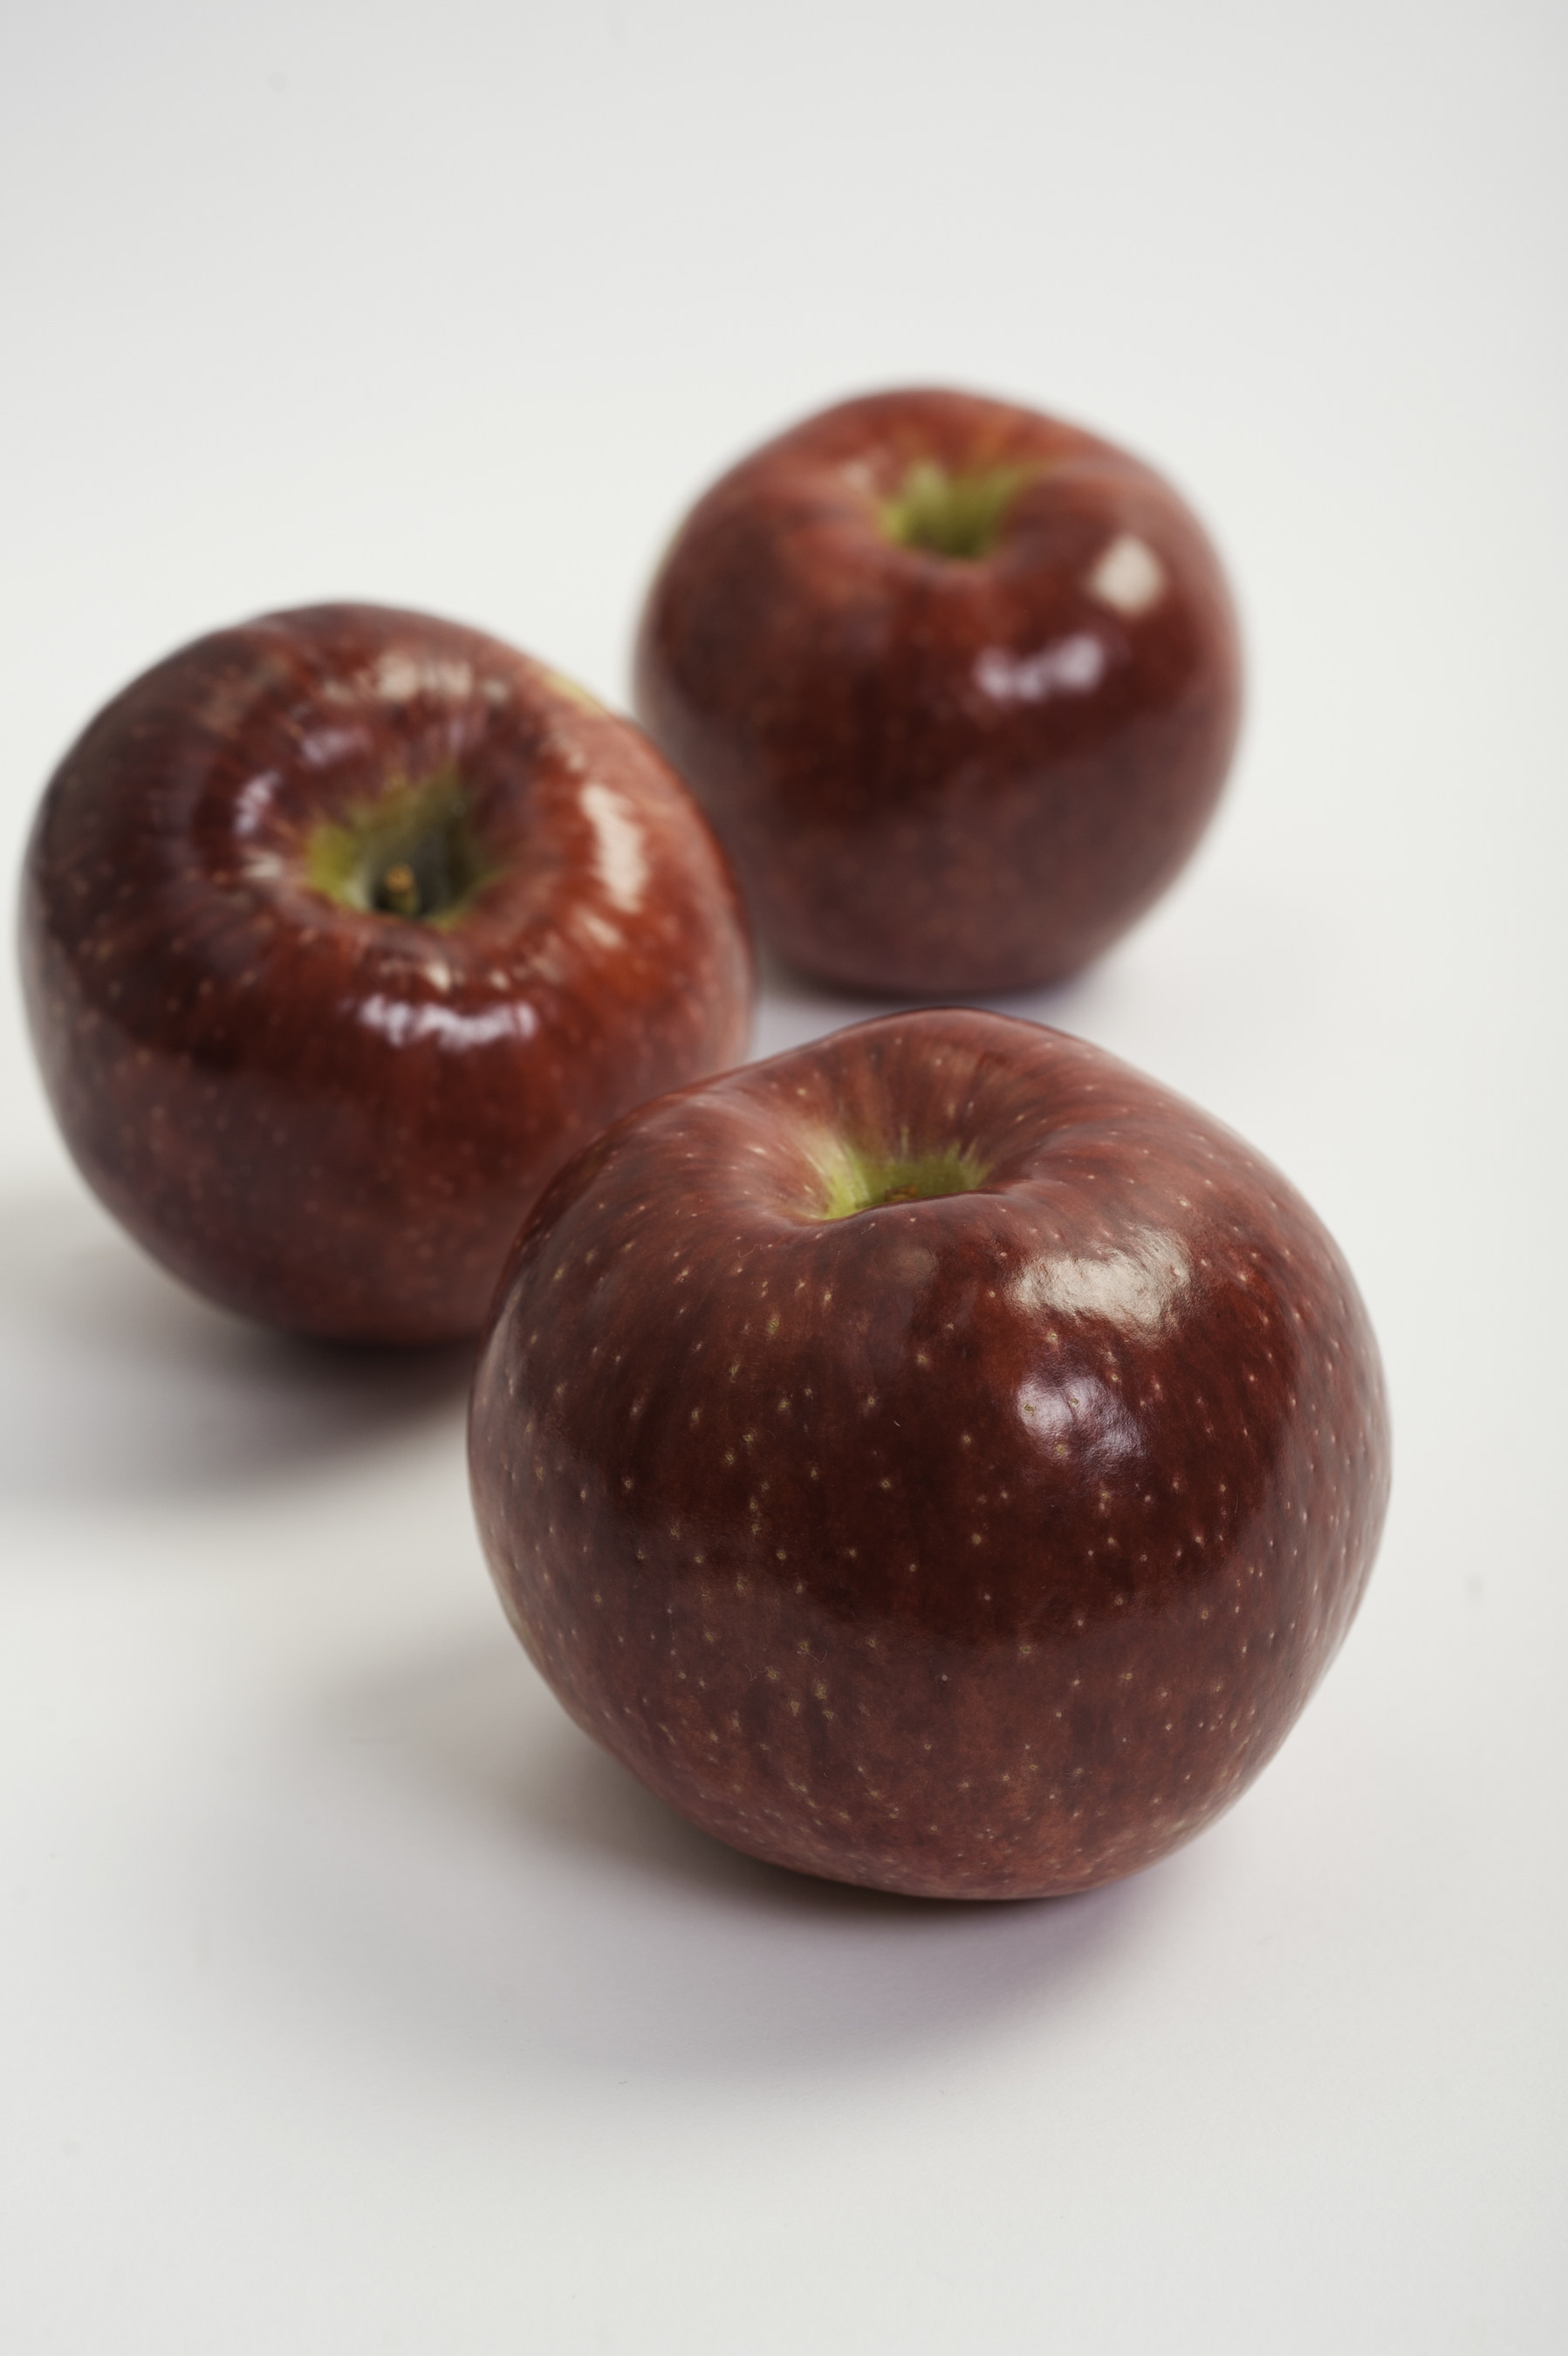 The new Pazazz apple is crisp and juicy with the right mix of sweet and tart. The fact that it is a late-harvest apple allows you to enjoy apples in the cold winter months.